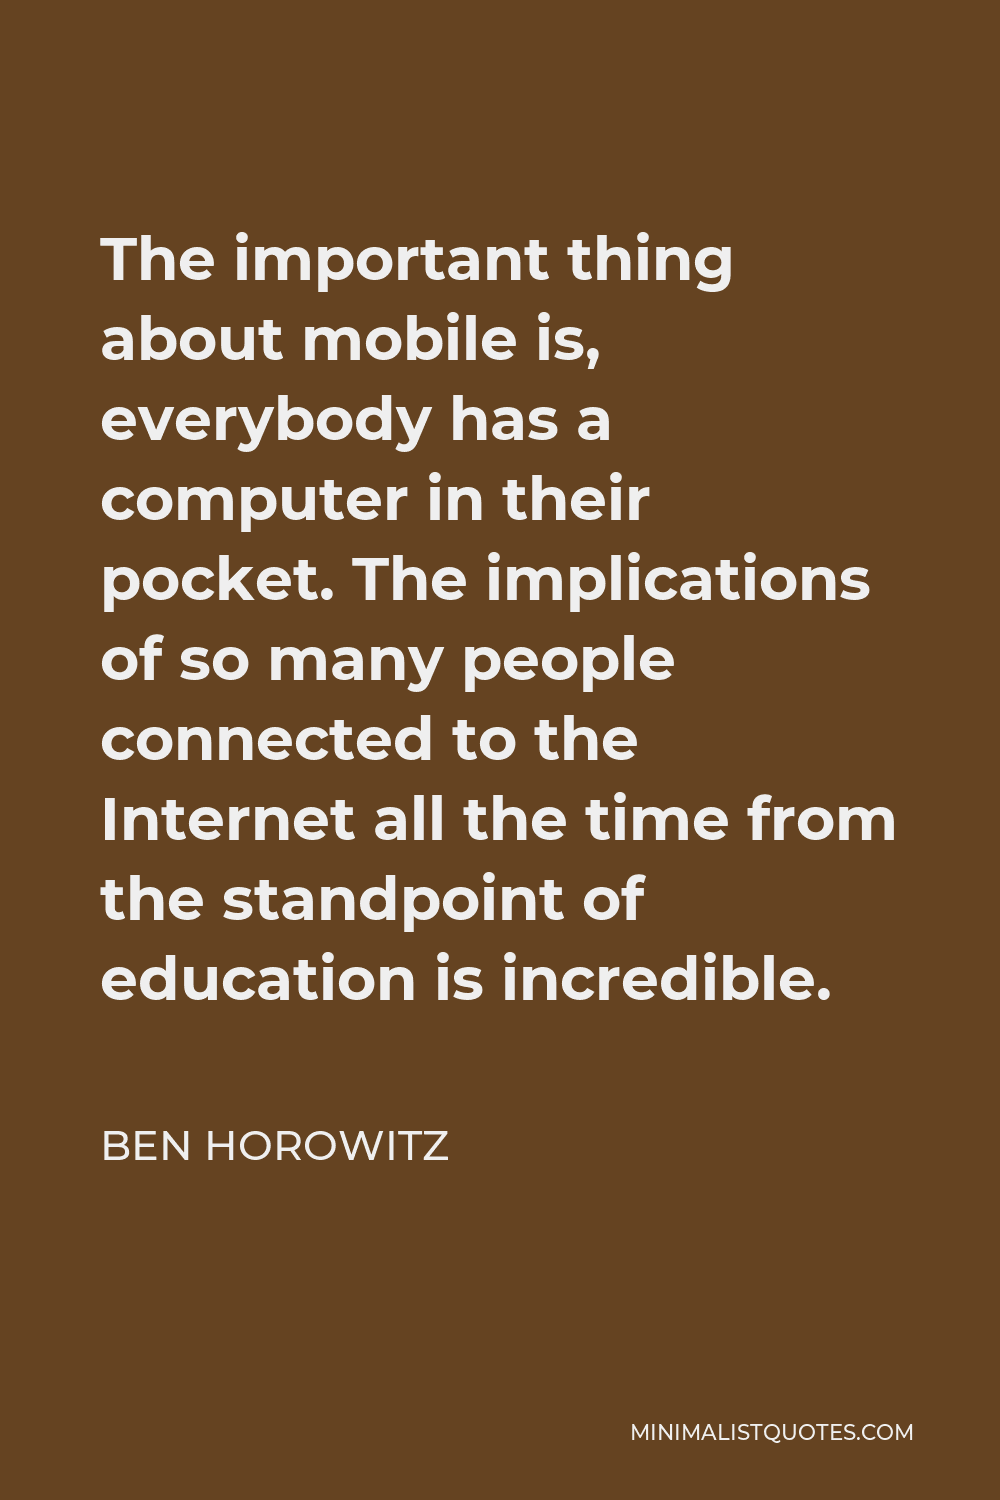 Ben Horowitz Quote - The important thing about mobile is, everybody has a computer in their pocket. The implications of so many people connected to the Internet all the time from the standpoint of education is incredible.